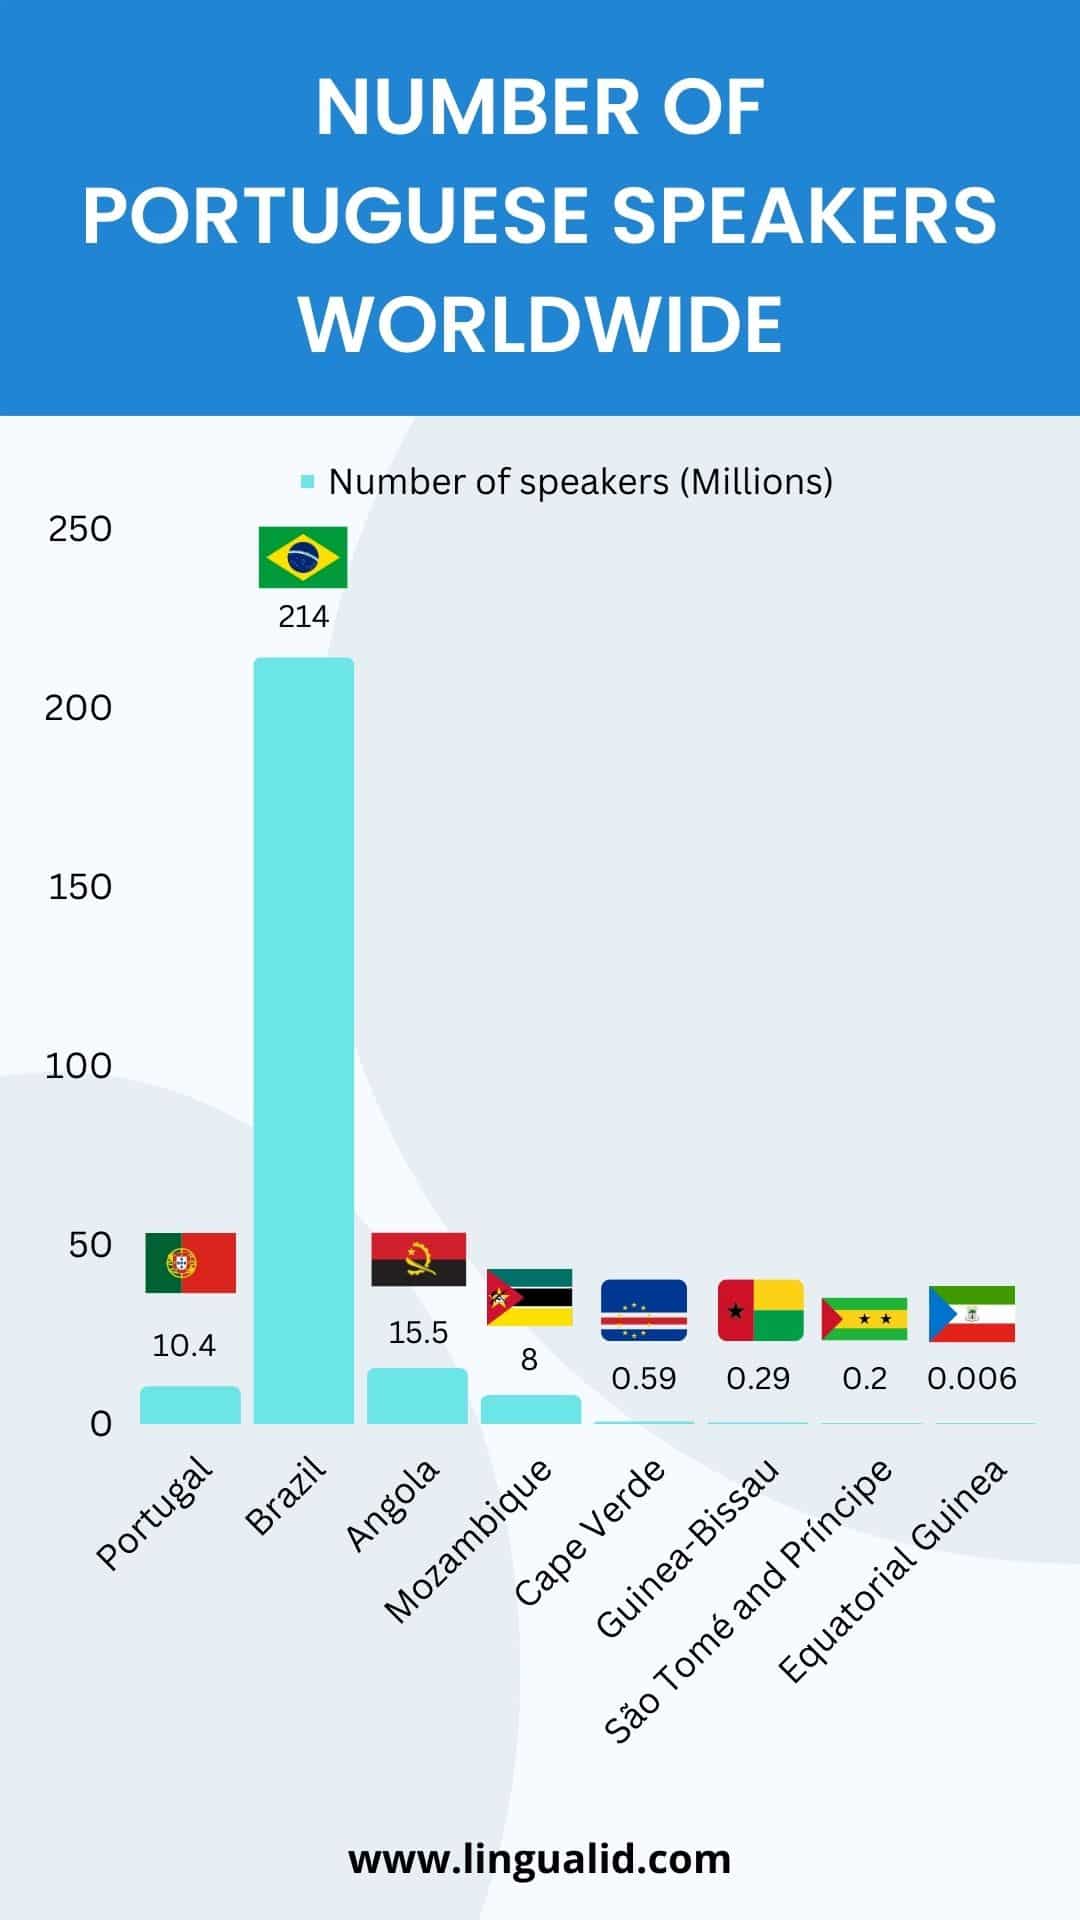 Number of Portuguese speakers worldwide